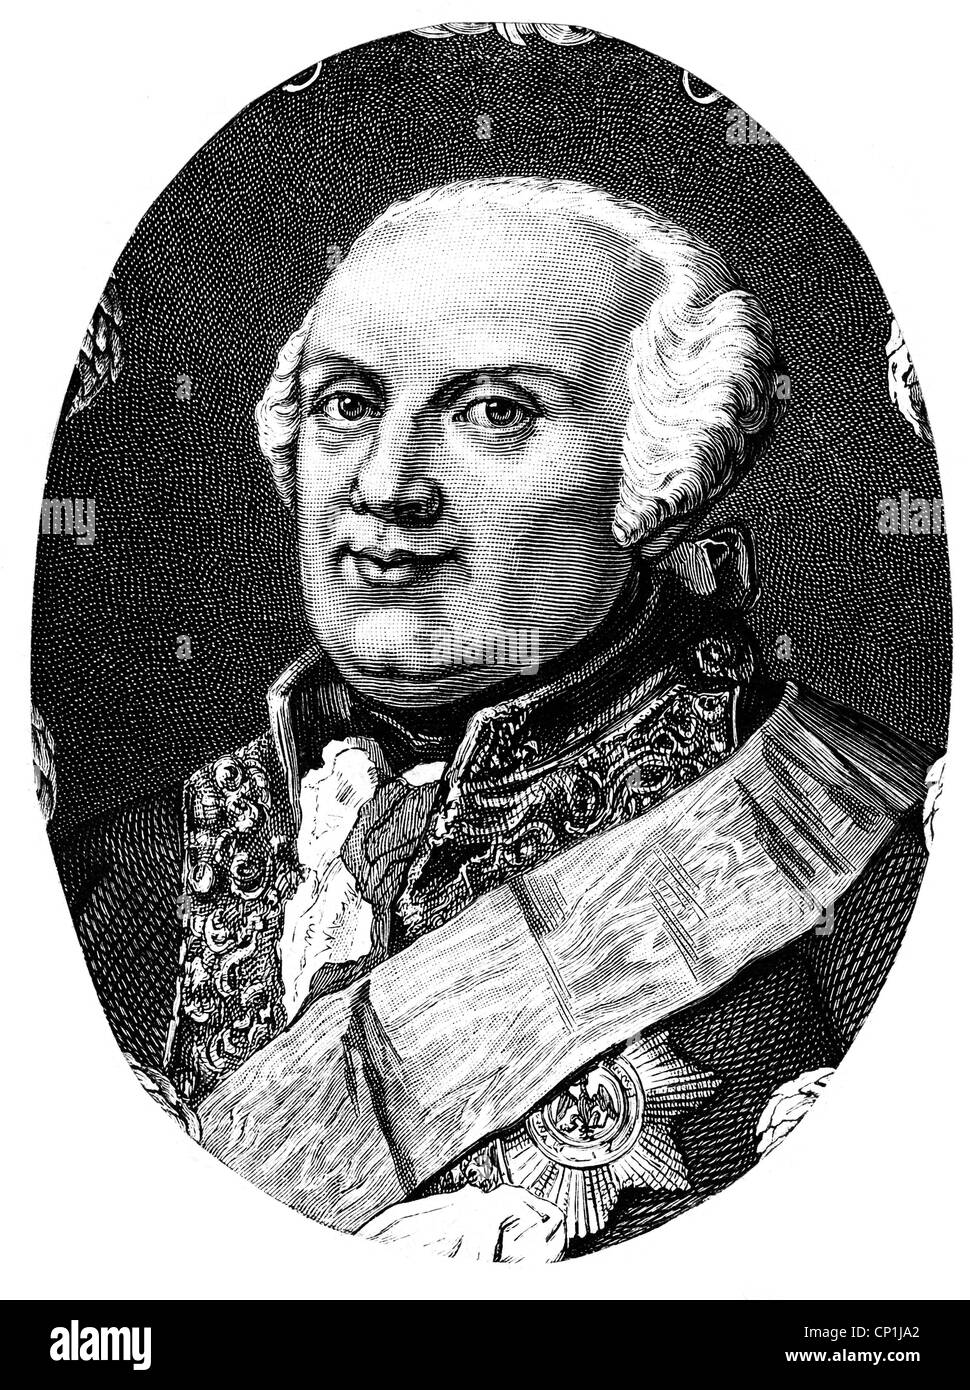 Frederick William II, 25.9. 1744 - 16.11.1797, King of Prussia 7.8.1786 - 16.11.1797, portrait, wood engraving, 19th century, Stock Photo